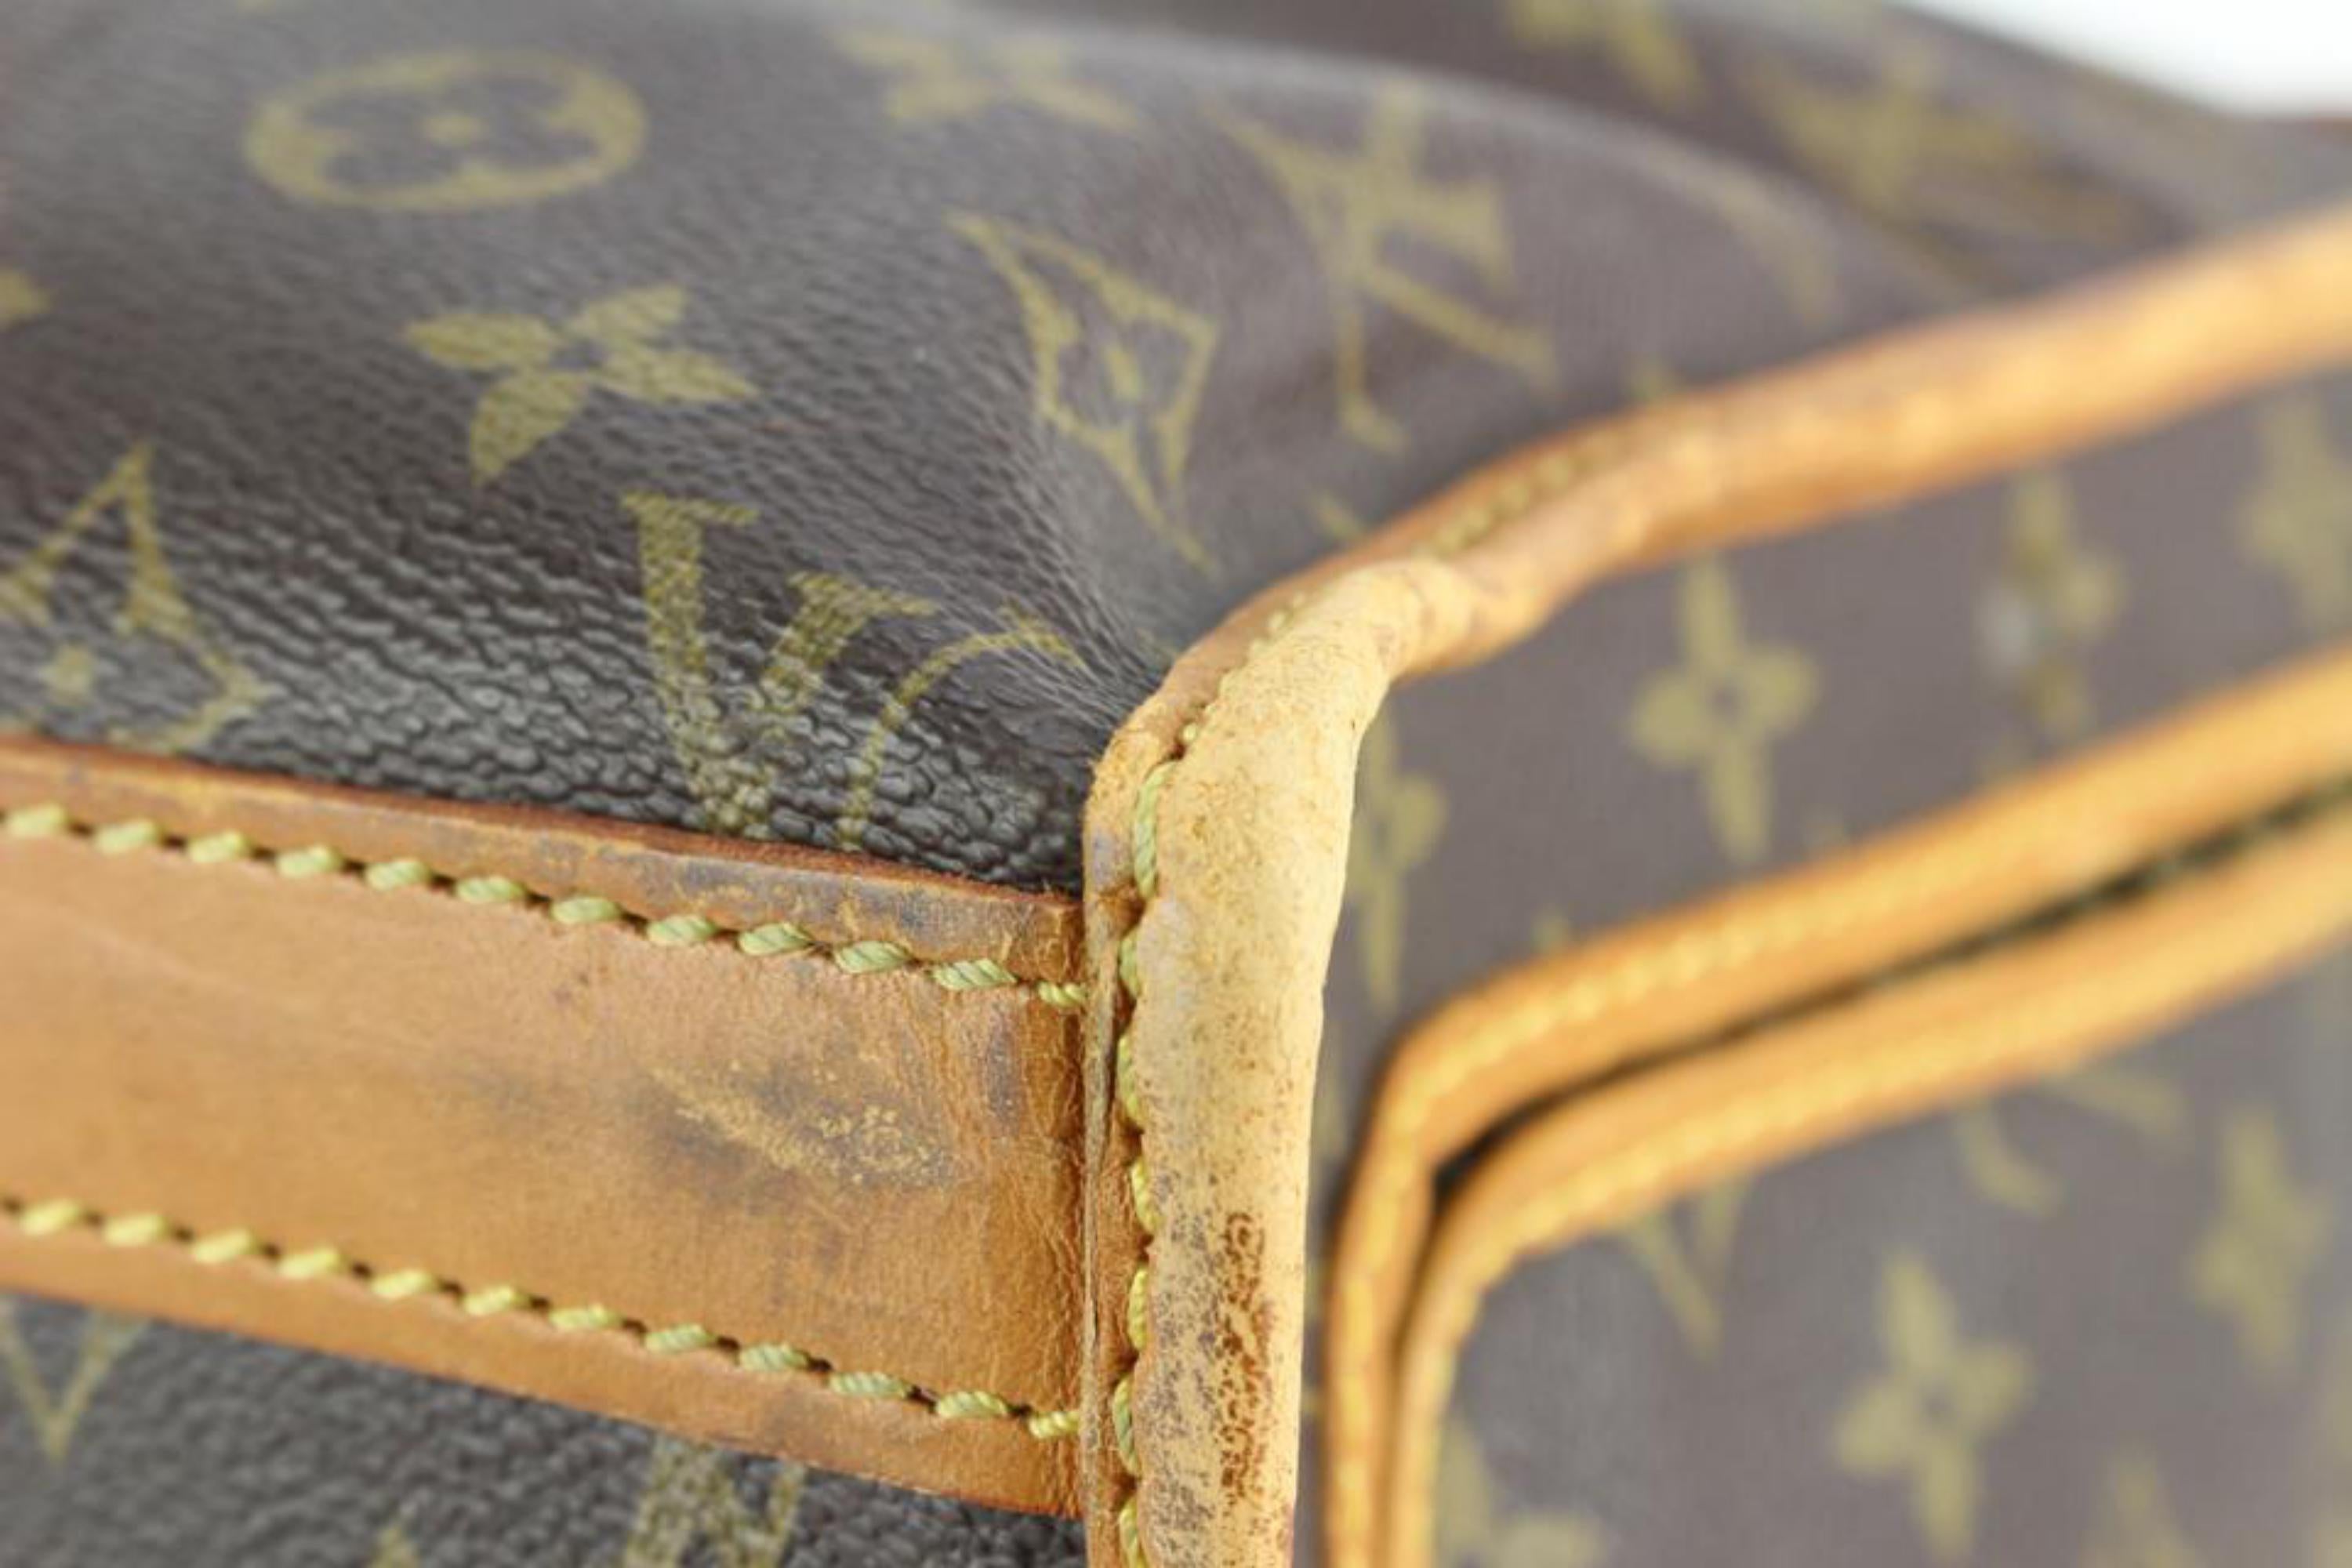 Louis Vuitton Monogram Dog Carrier 40 Sac Chien Pet Bag 88lk513s In Fair Condition For Sale In Dix hills, NY